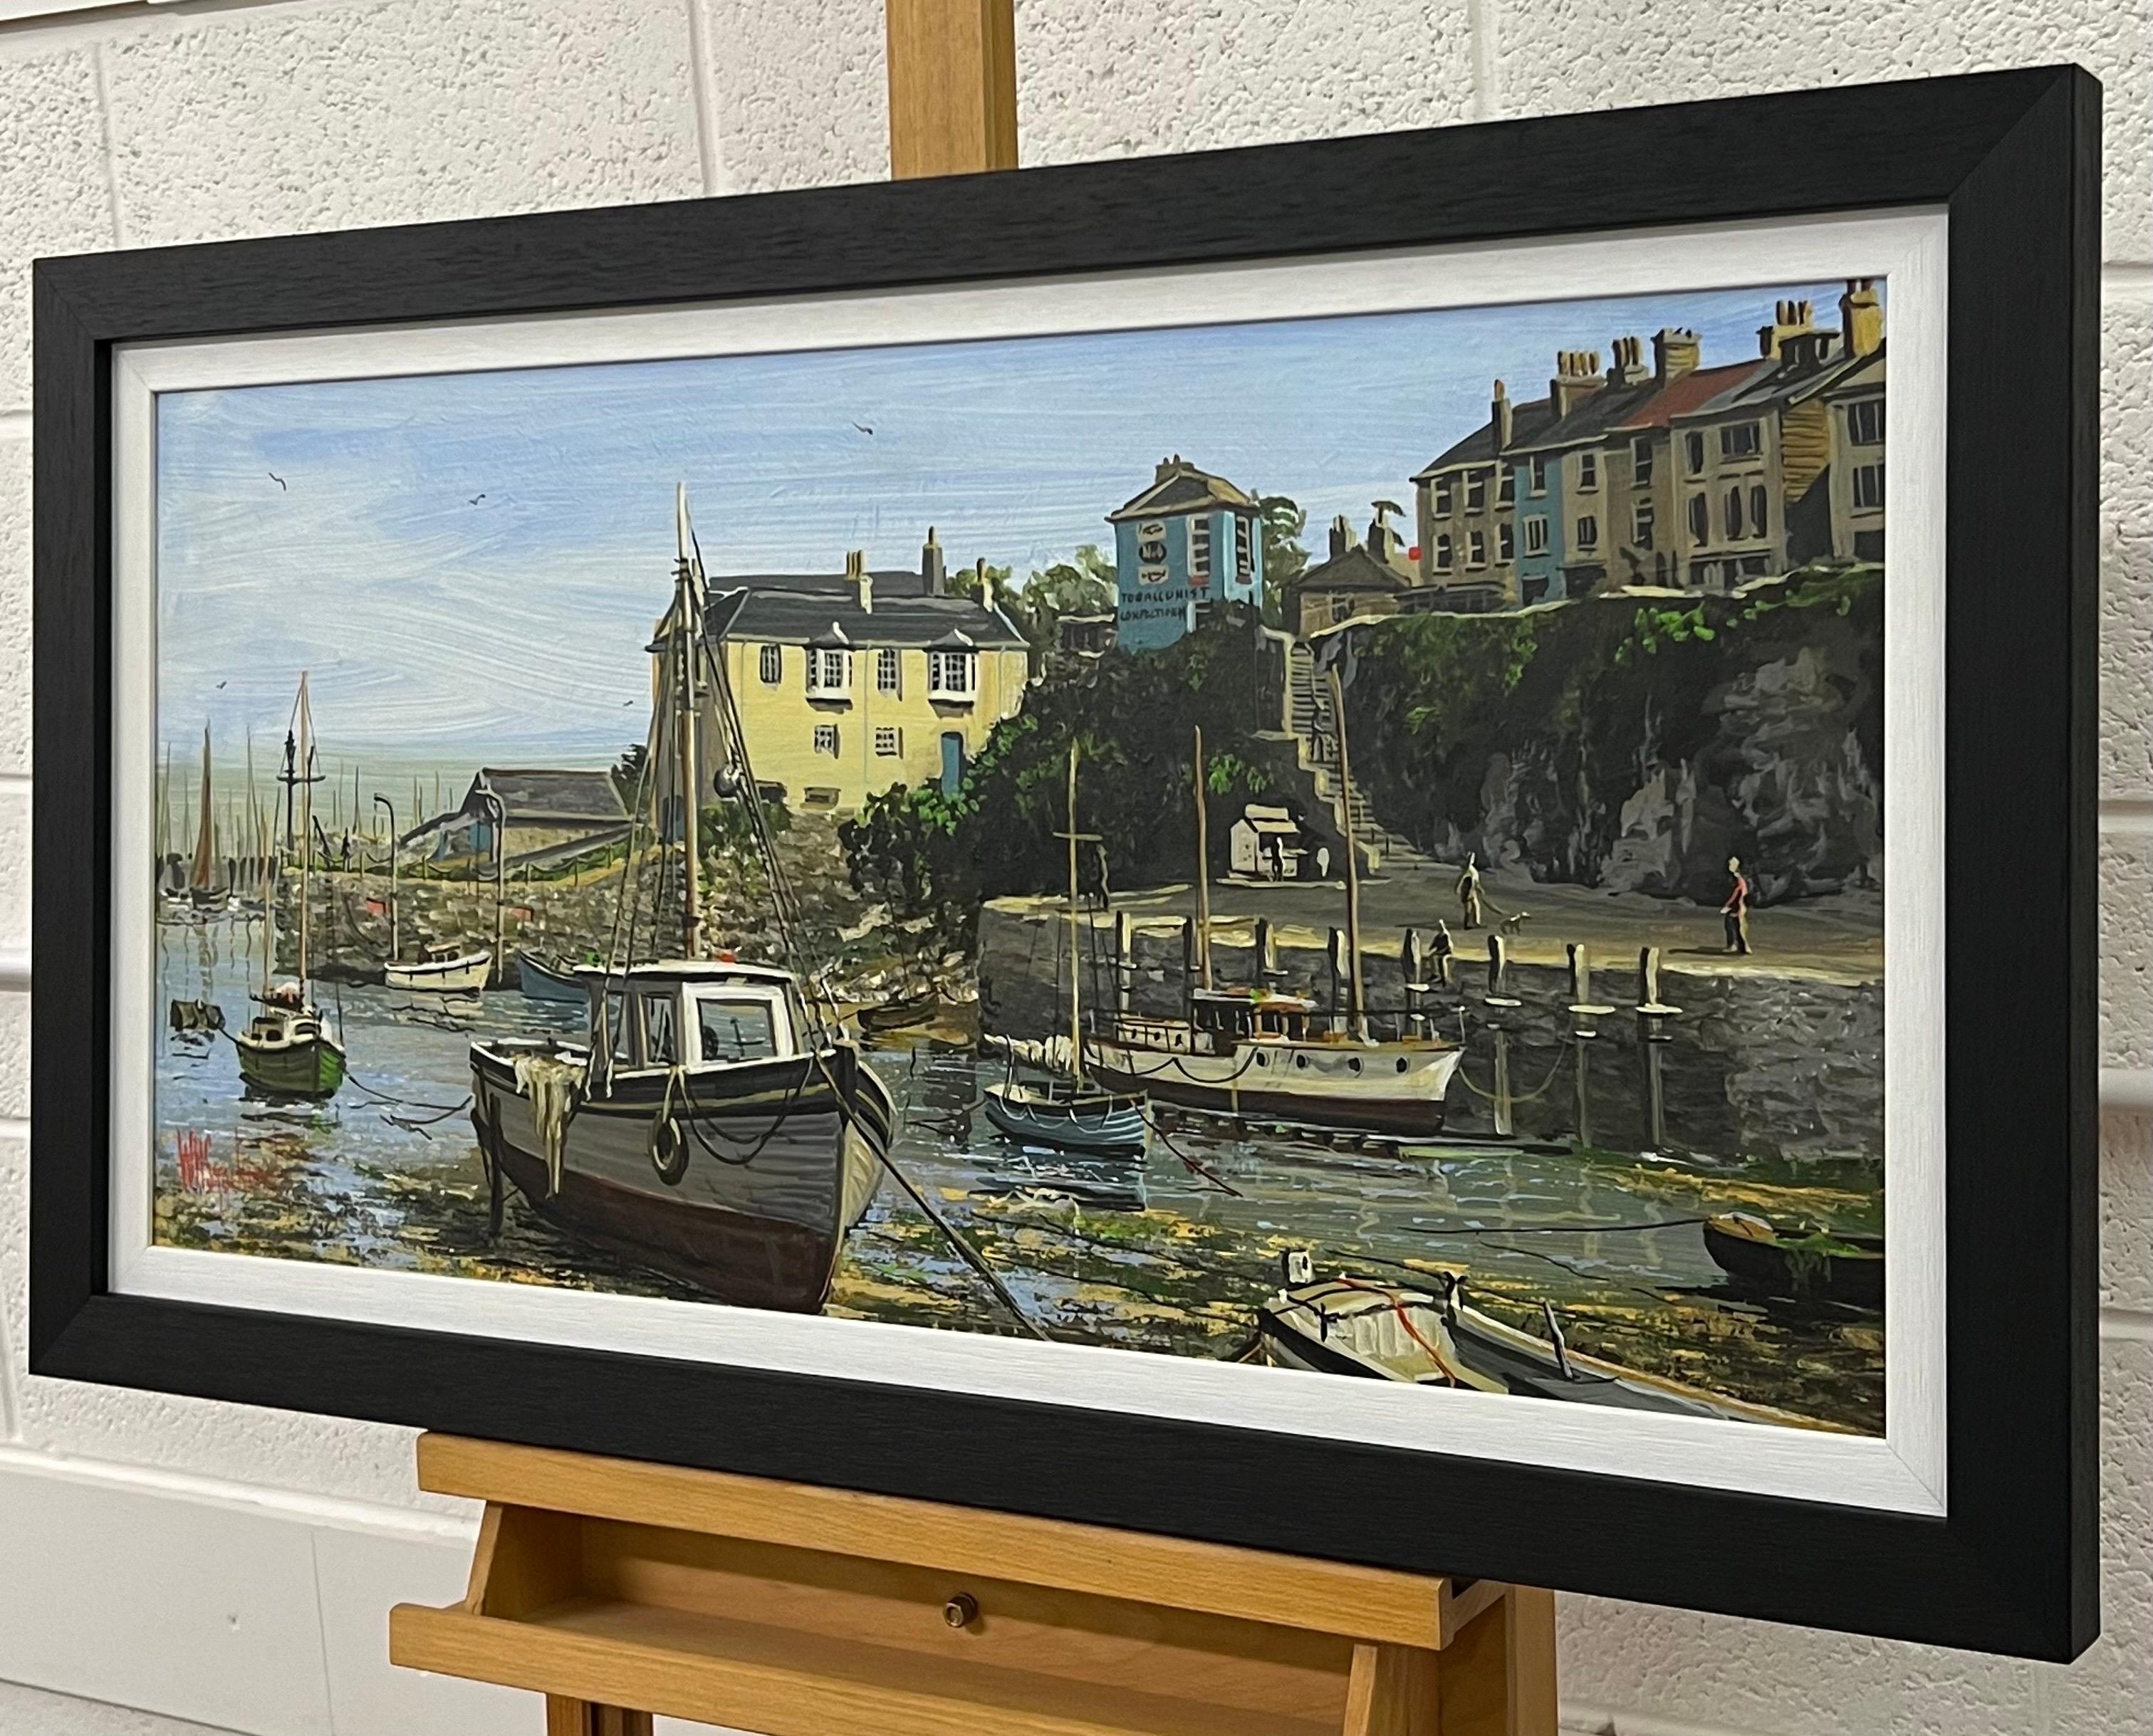 Vintage 1970's Harbour Scene with Moored Boats & Figures by British Artist - Modern Painting by William Stockman